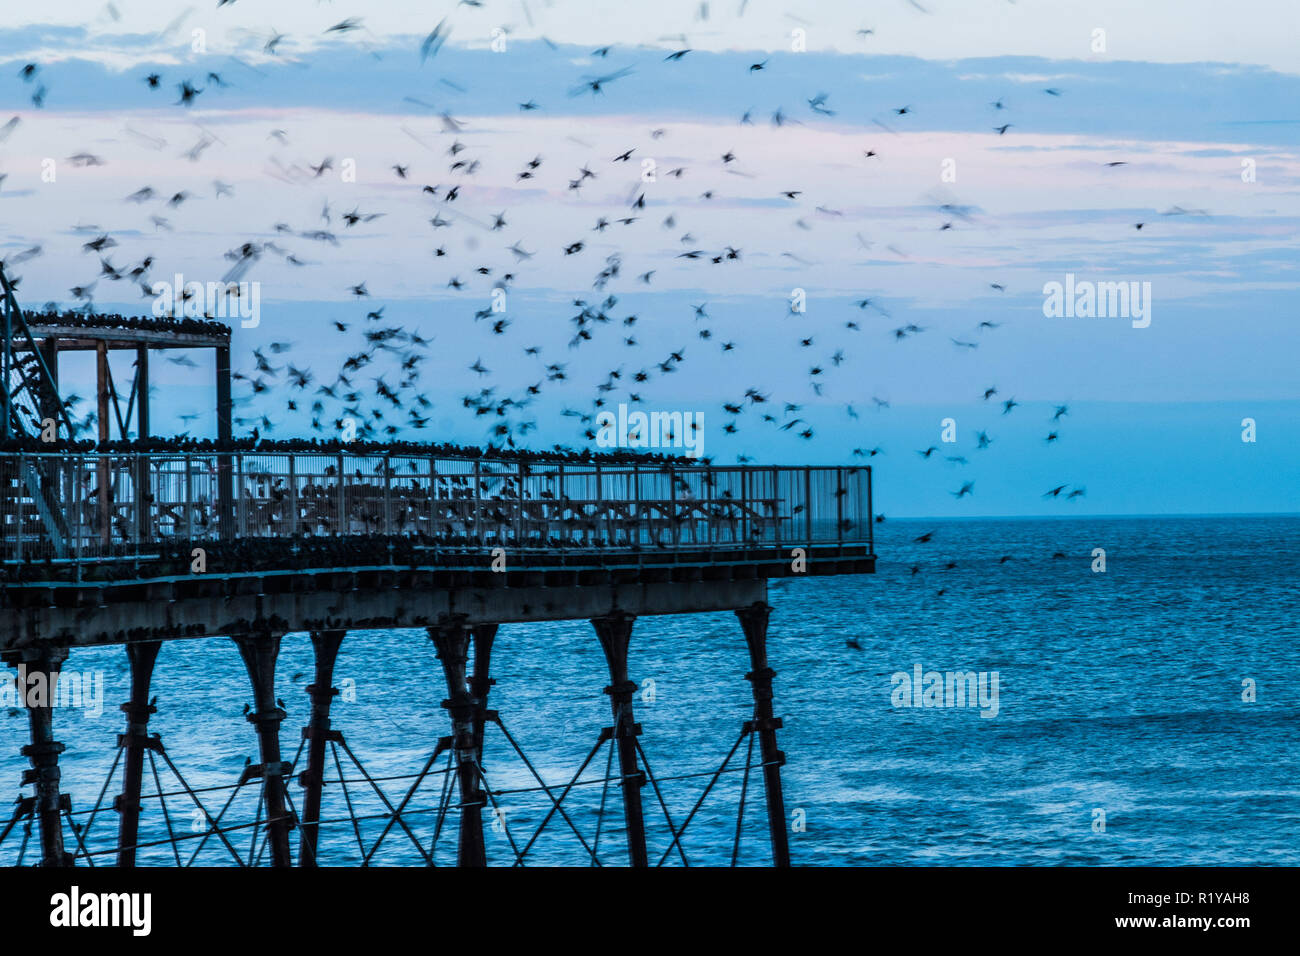 Aberystwyth Wales UK, 15/11/2018.  UK Weather: The blurred shapes of some of the  of thousands of starlings  as they swoop down to roost noisily for the night on the forest  of cast iron legs underneath the Aberystwyth’s Victorian seaside pier. Aberystwyth is one of the few urban roosts in the country and draws people from all over the UK to witness the spectacular nightly displays.  photo credit Keith Morris / Alamy Live News Stock Photo